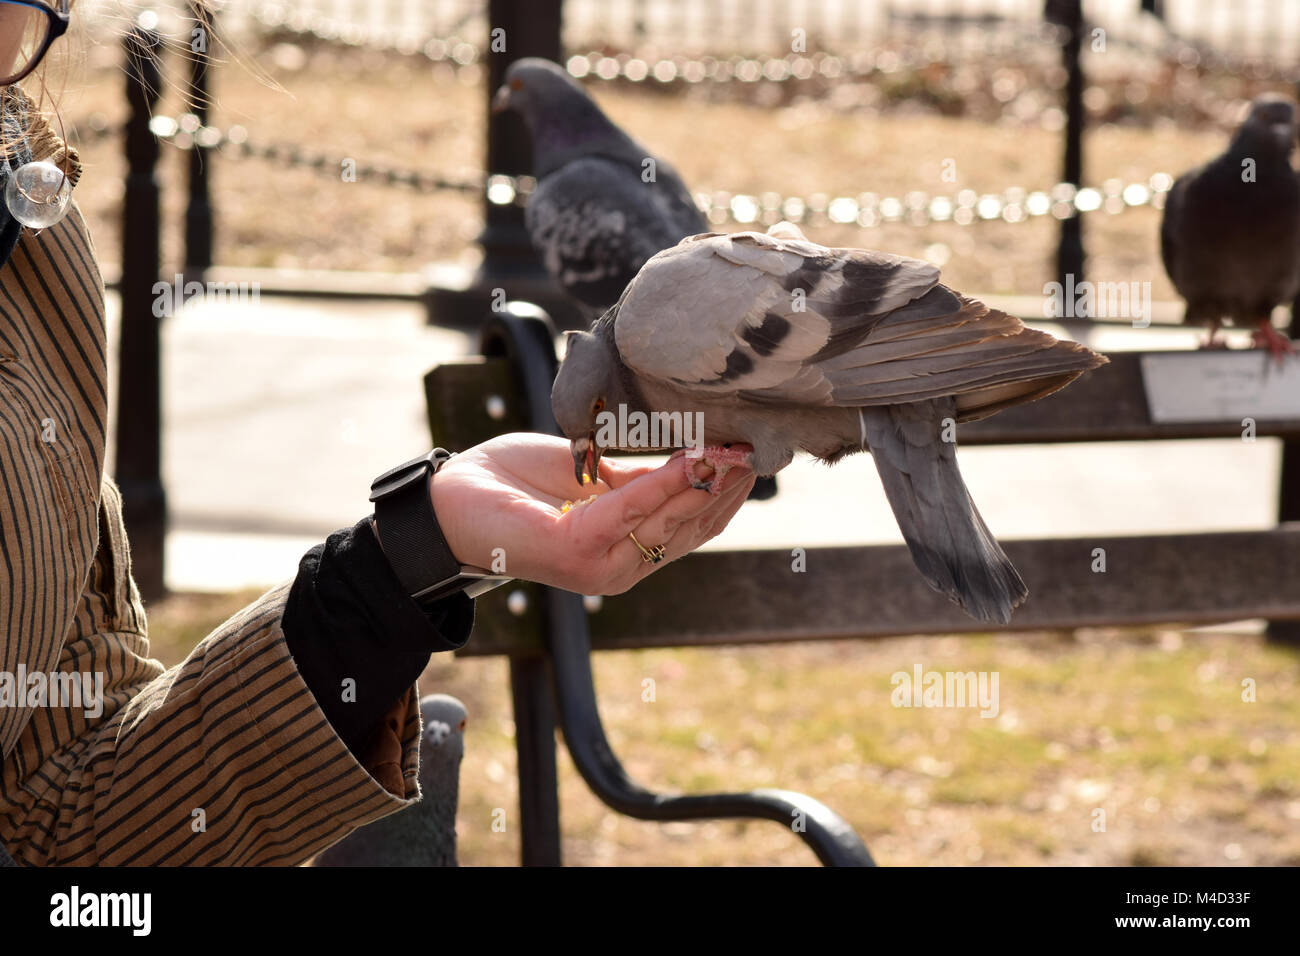 Pigeons eating corn from a woman's outstretched hand in the park Stock Photo